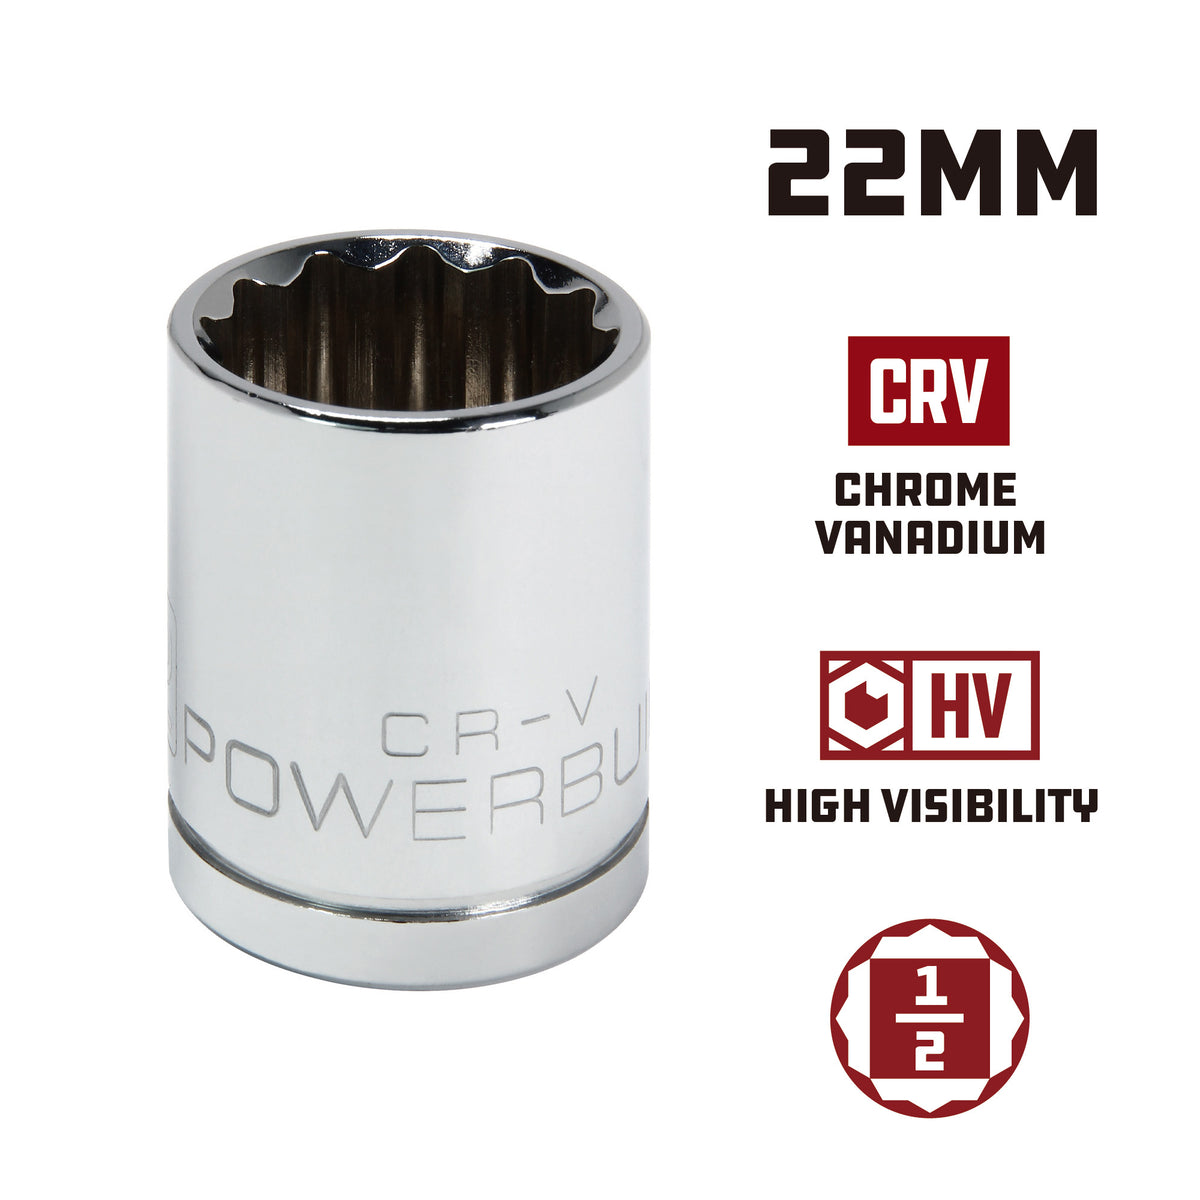 1/2 Inch Drive x 22 MM 12 Point Shallow Socket